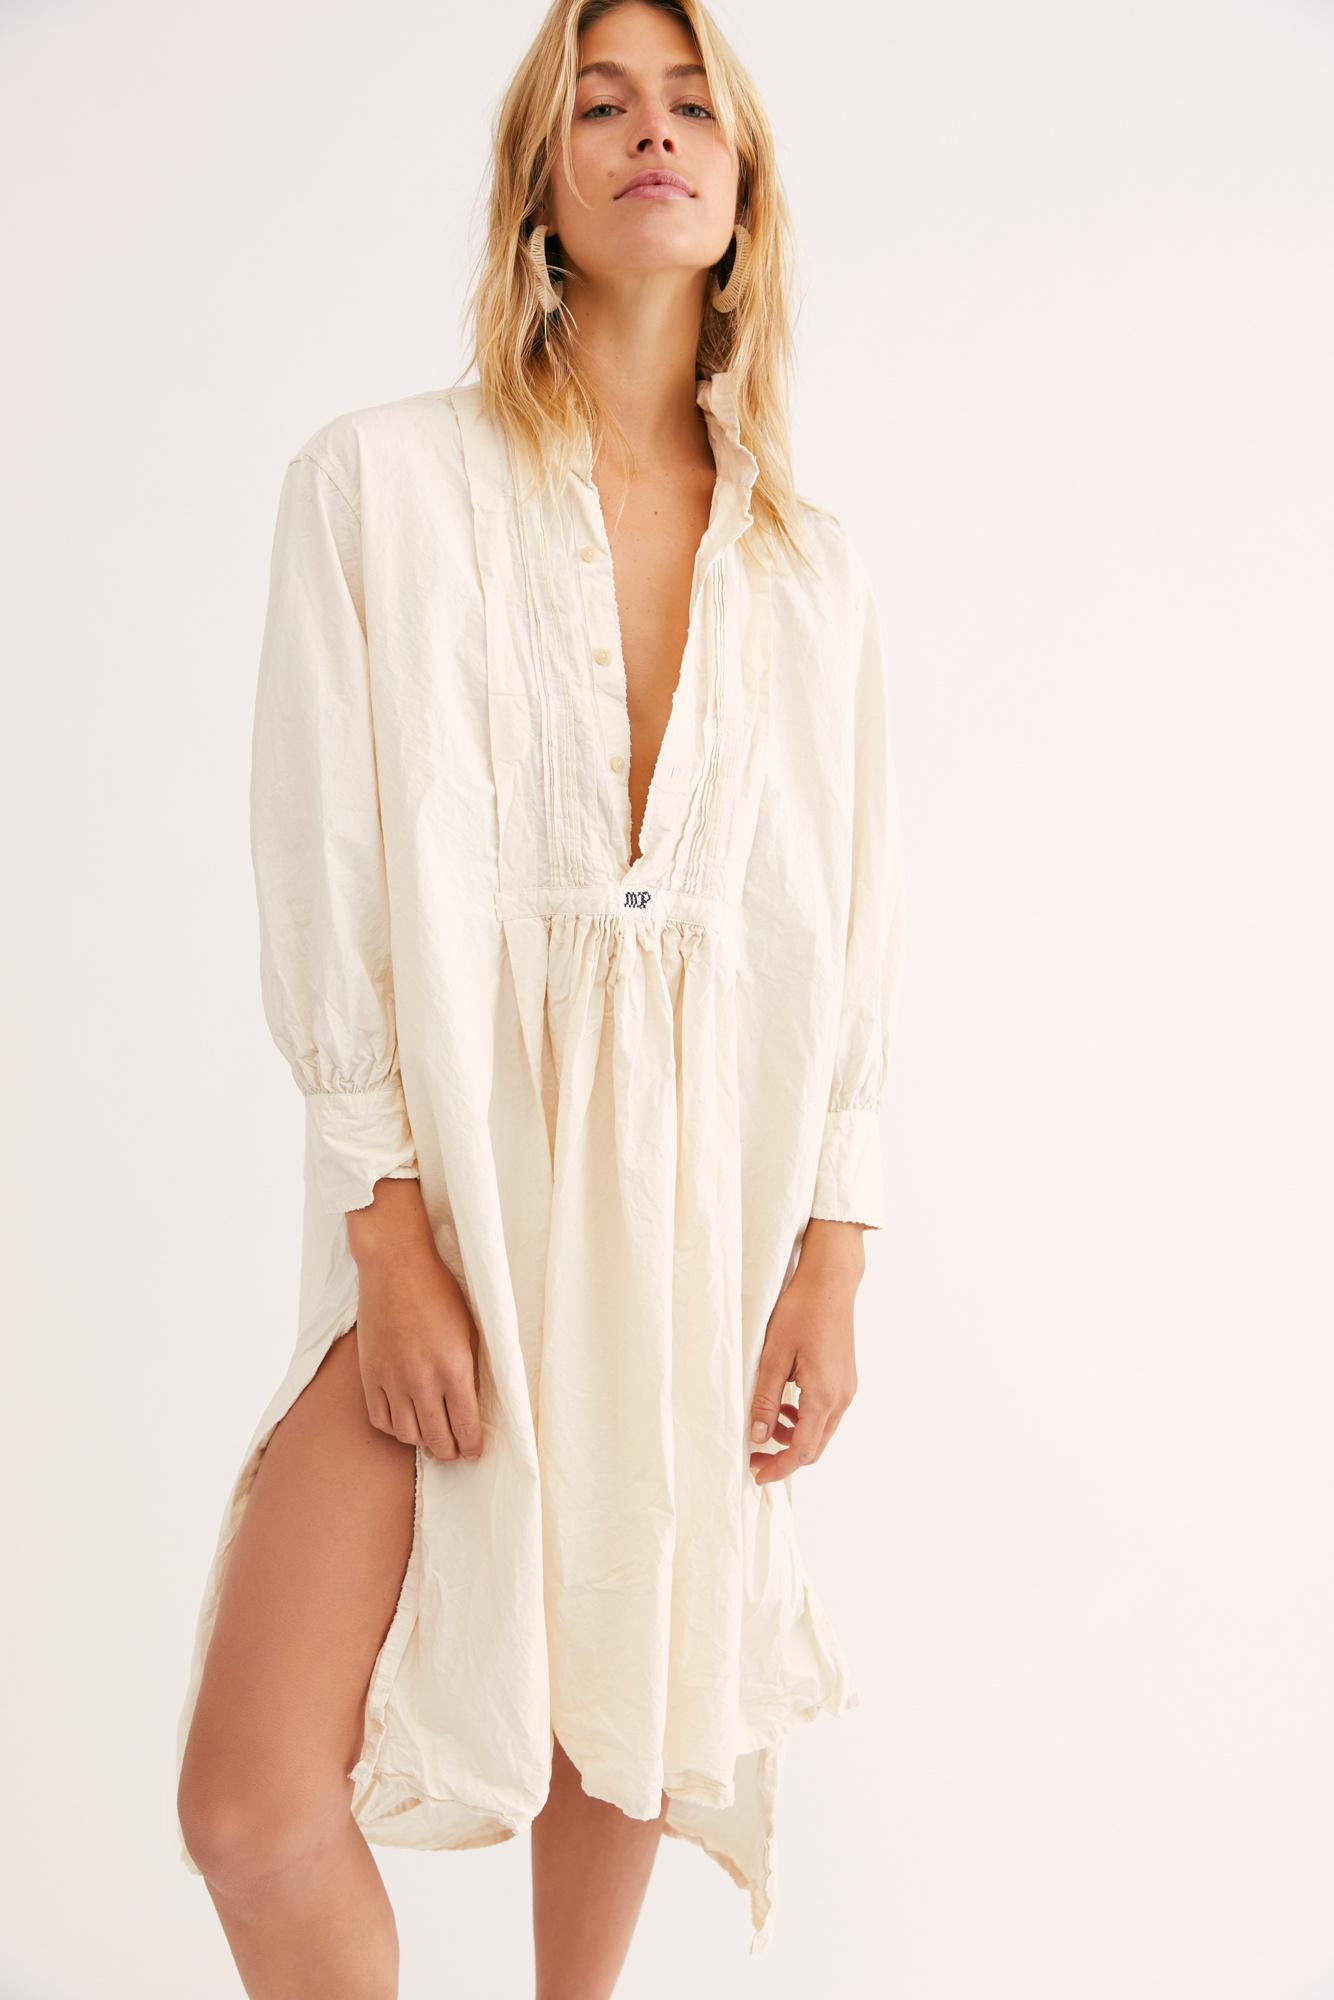 Free People Cotton Cordelia Night Shirt By Magnolia Pearl in Natural - Lyst